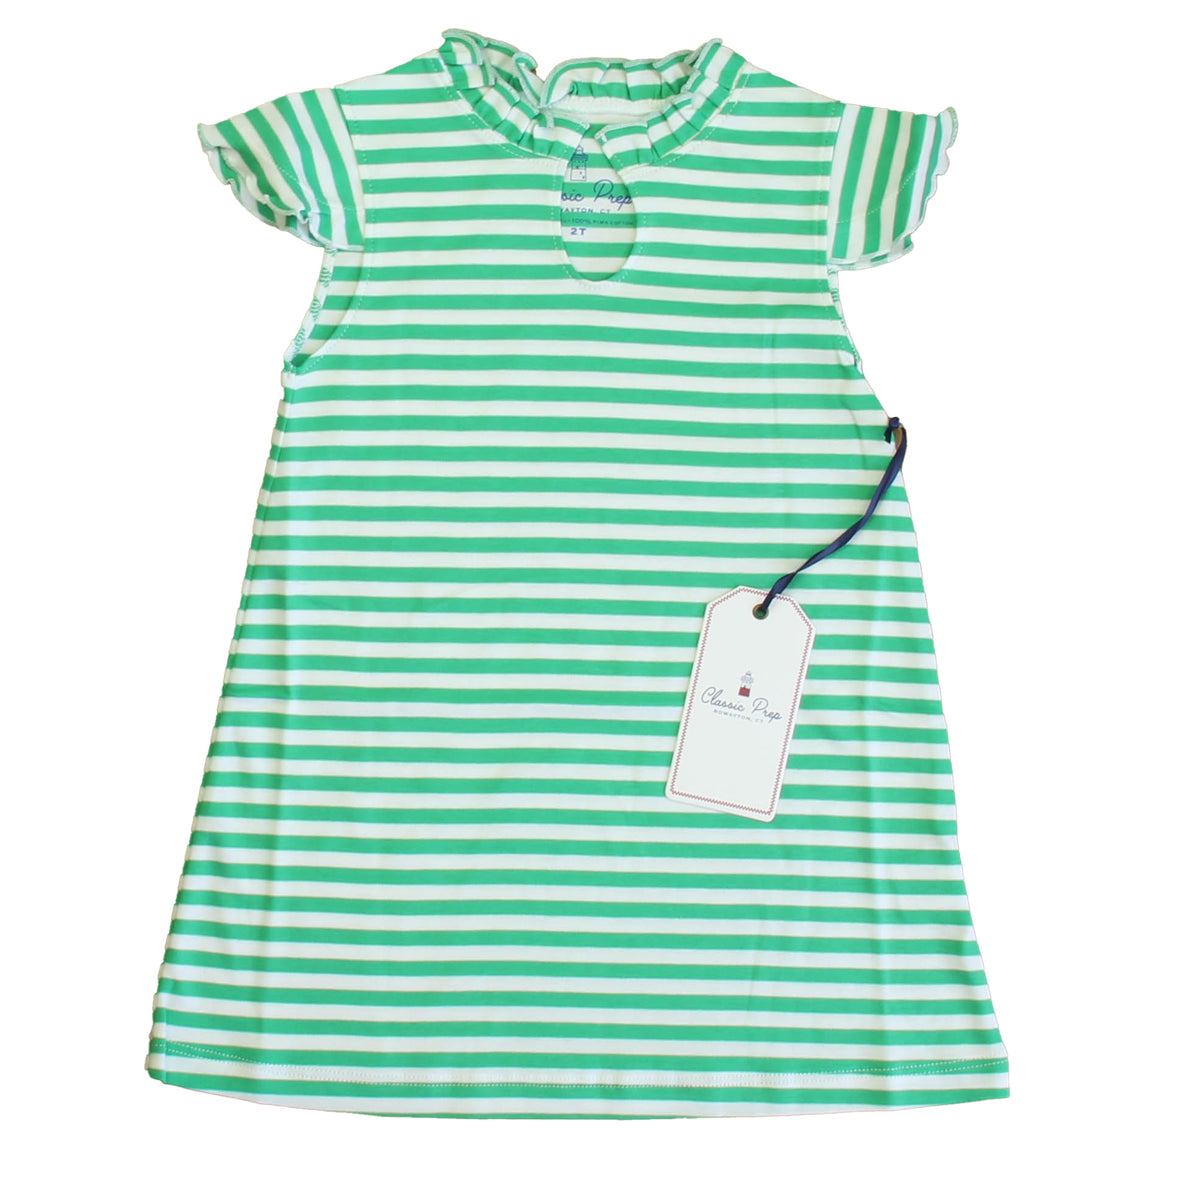 New with Tags: Blarney | Bright White Dress size: 2-5T -- FINAL SALE